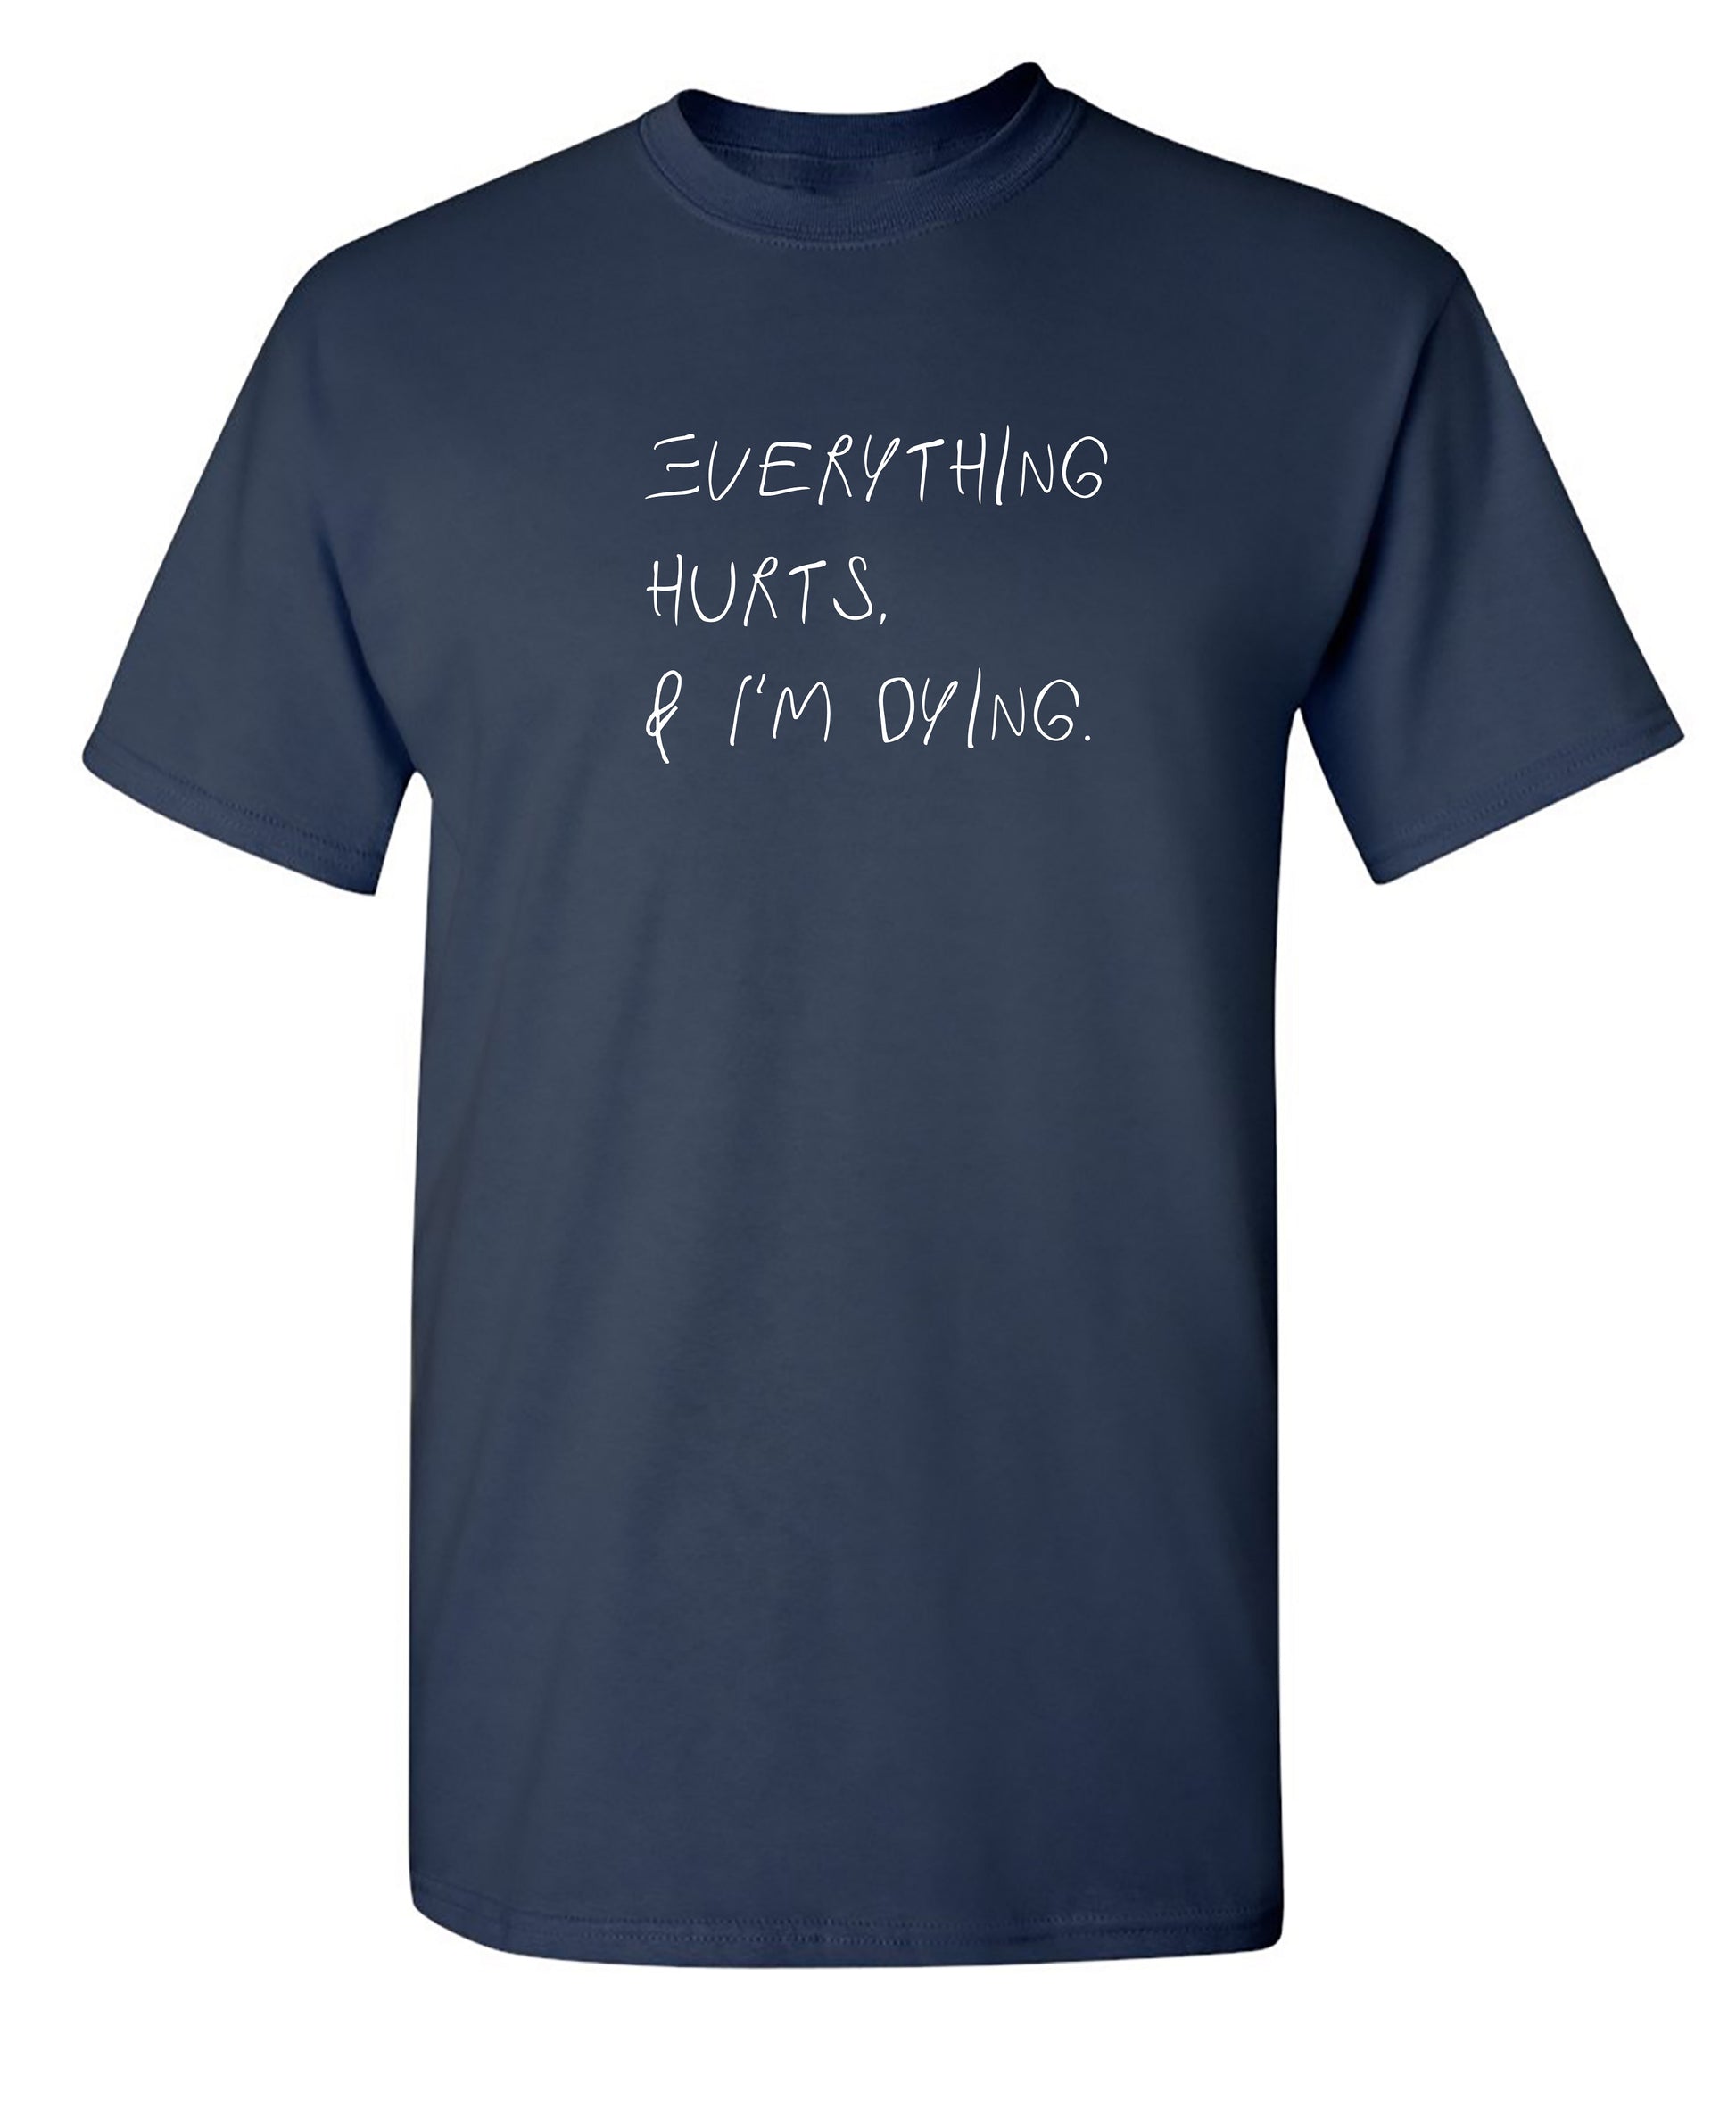 Everything hurts and I'm dying - Funny T Shirts & Graphic Tees